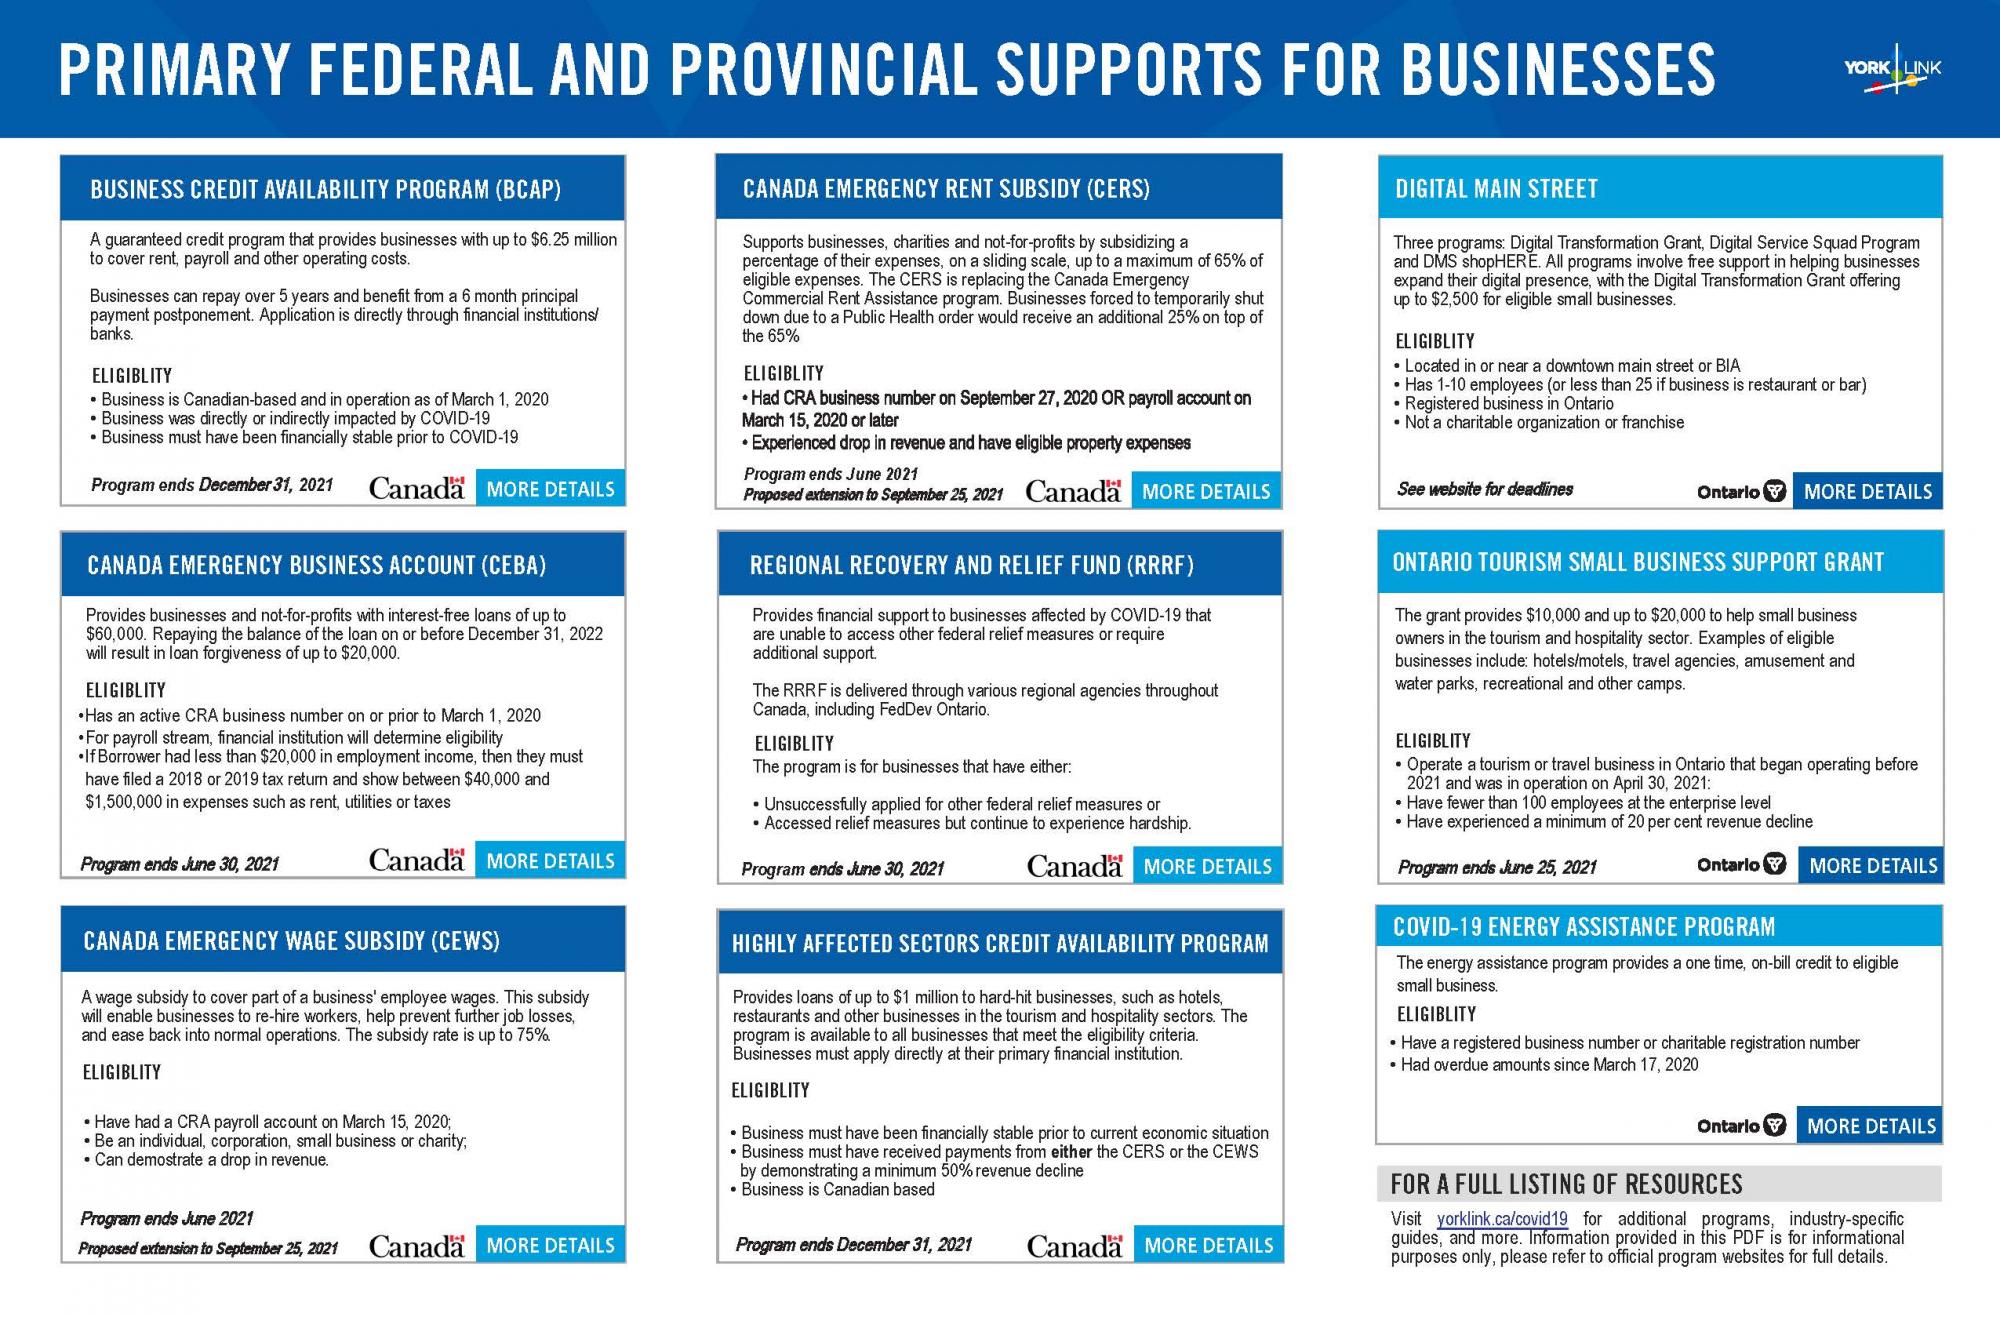 Primary Federal and Provincial Support for Businesses